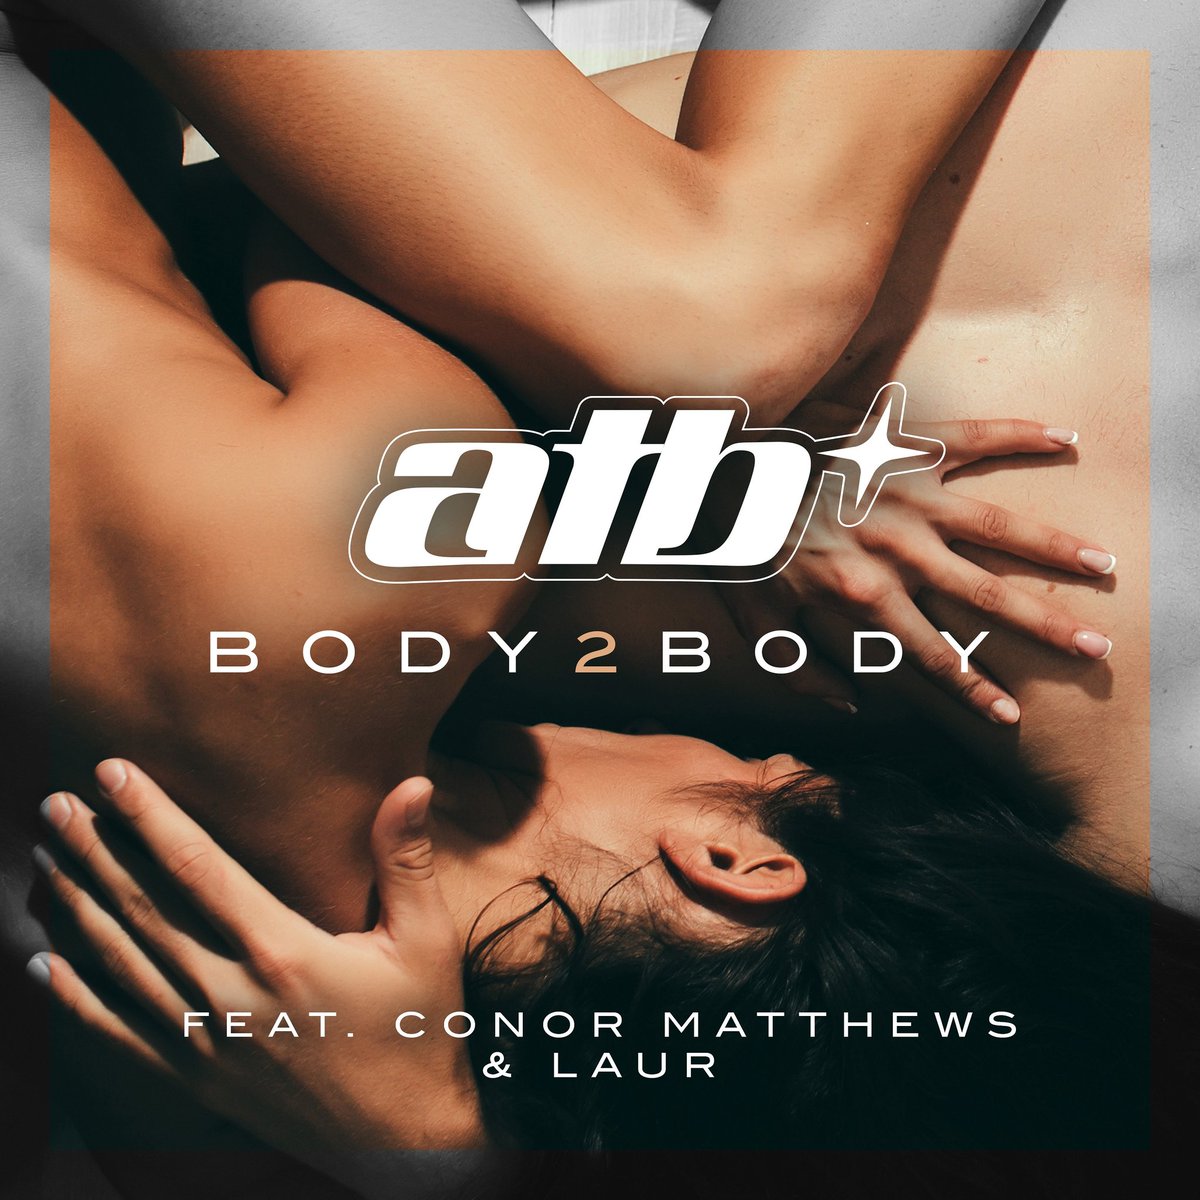 My new single "BODY 2 BODY feat. Conor Matthews & LAUR" is OUT NOW. Get it here: atb.lnk.to/Body2BodyAT https://t.co/GQO3uKT1kv